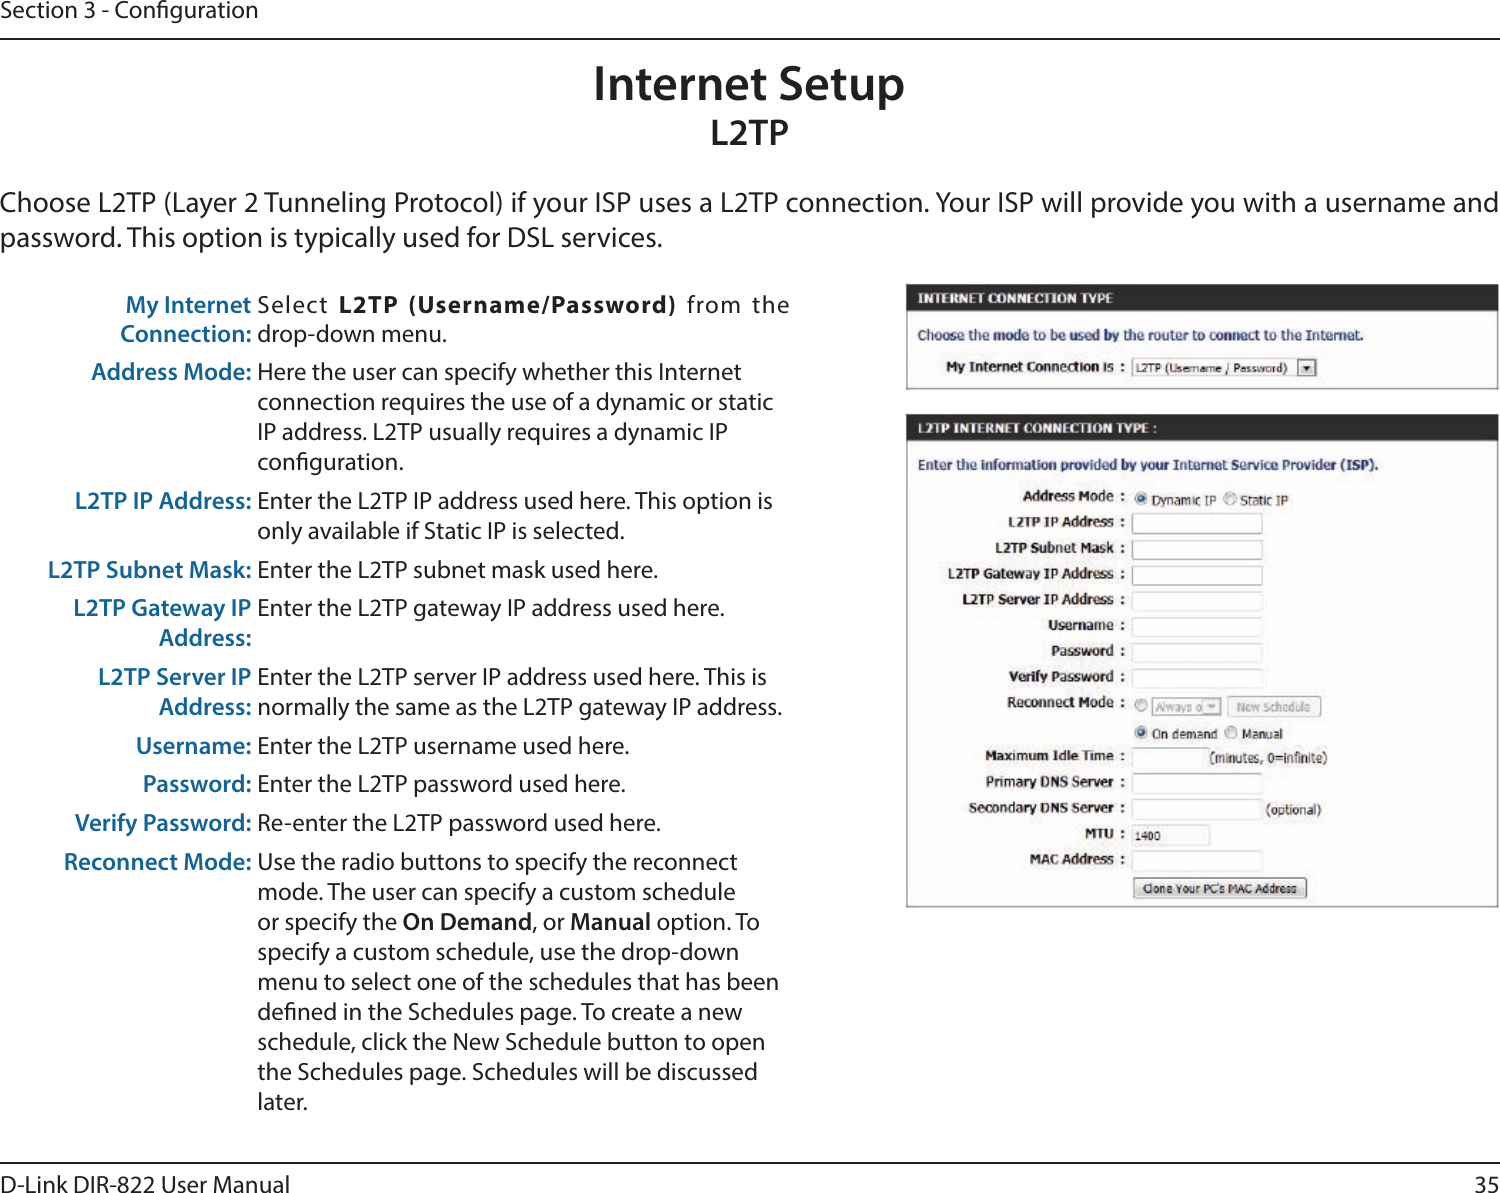 35D-Link DIR-822 User ManualSection 3 - CongurationInternet SetupL2TPChoose L2TP (Layer 2 Tunneling Protocol) if your ISP uses a L2TP connection. Your ISP will provide you with a username and password. This option is typically used for DSL services. My Internet Connection:Select  L2TP(Username/Password) from the  drop-down menu.Address Mode: Here the user can specify whether this Internet connection requires the use of a dynamic or static IP address. L2TP usually requires a dynamic IP  conguration.L2TP IP Address: Enter the L2TP IP address used here. This option is only available if Static IP is selected.L2TP Subnet Mask: Enter the L2TP subnet mask used here.L2TP Gateway IP Address:Enter the L2TP gateway IP address used here.L2TP Server IP Address:Enter the L2TP server IP address used here. This is normally the same as the L2TP gateway IP address.Username: Enter the L2TP username used here.Password: Enter the L2TP password used here.Verify Password: Re-enter the L2TP password used here.Reconnect Mode: Use the radio buttons to specify the reconnect mode. The user can specify a custom schedule or specify the On Demand, or Manual option. To specify a custom schedule, use the drop-down menu to select one of the schedules that has been dened in the Schedules page. To create a new schedule, click the New Schedule button to open the Schedules page. Schedules will be discussed later.